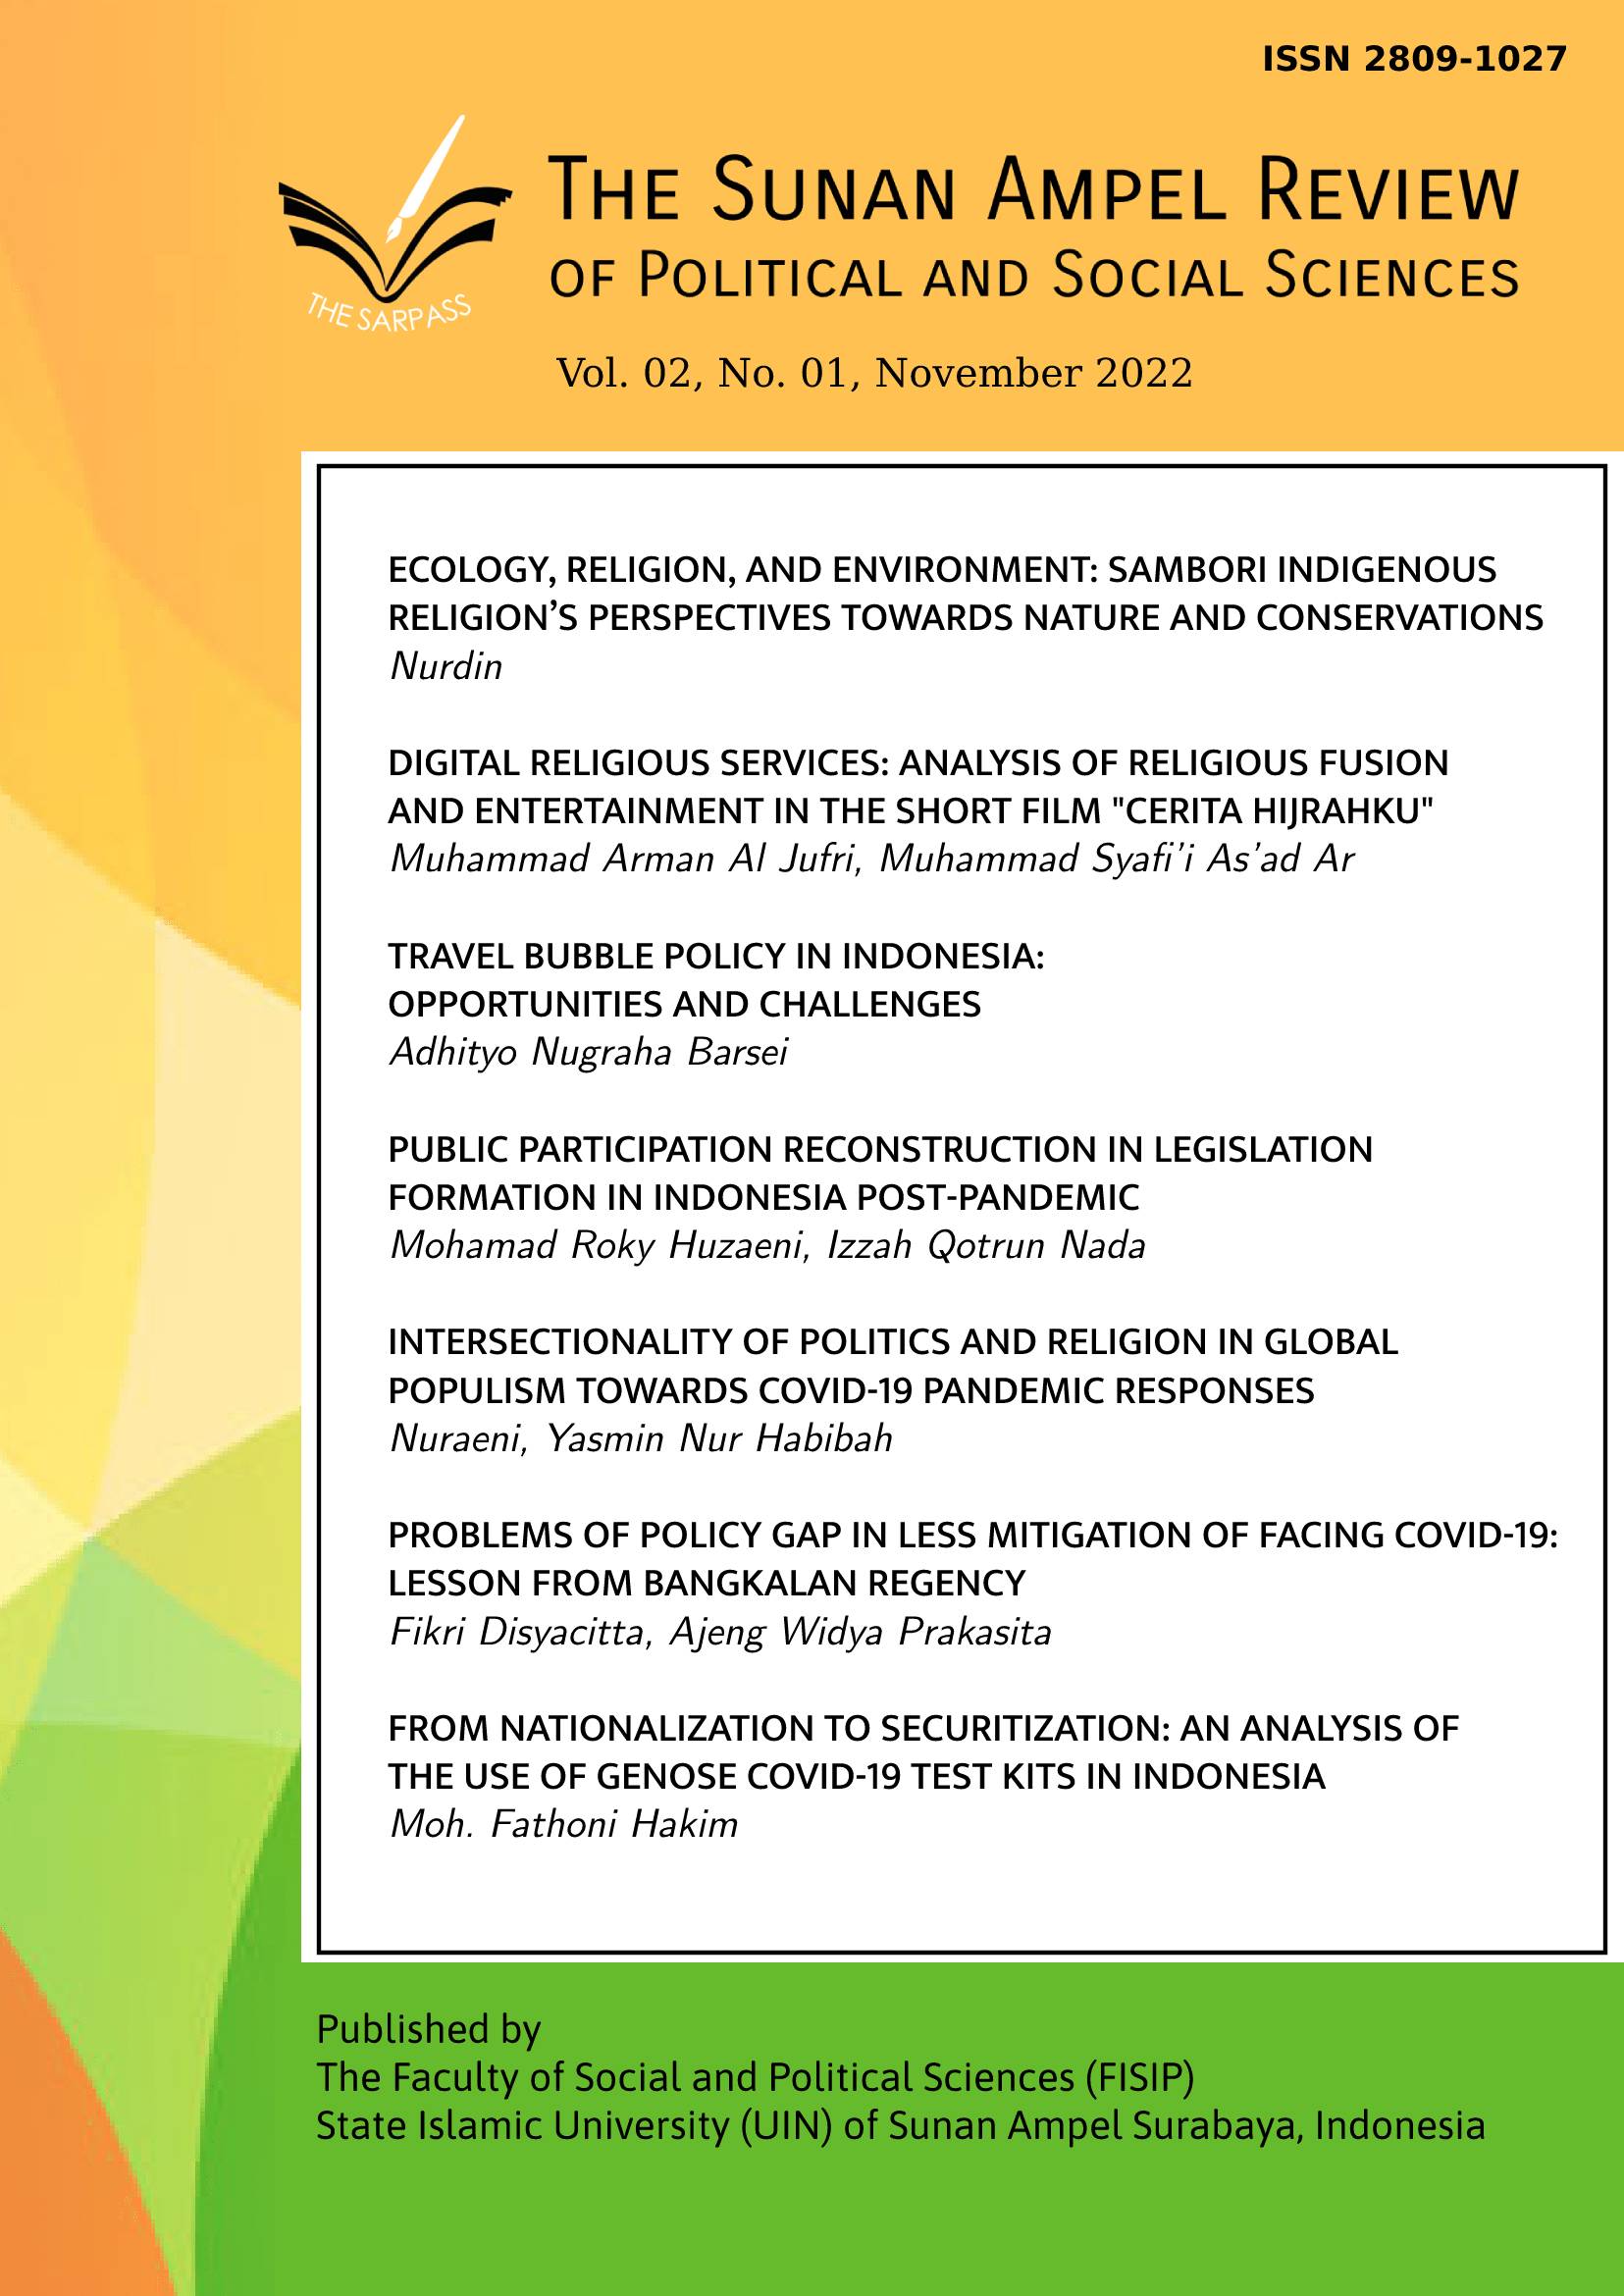 					View Vol. 2 No. 1 (2022): The Sunan Ampel Review of Political and Social Sciences
				